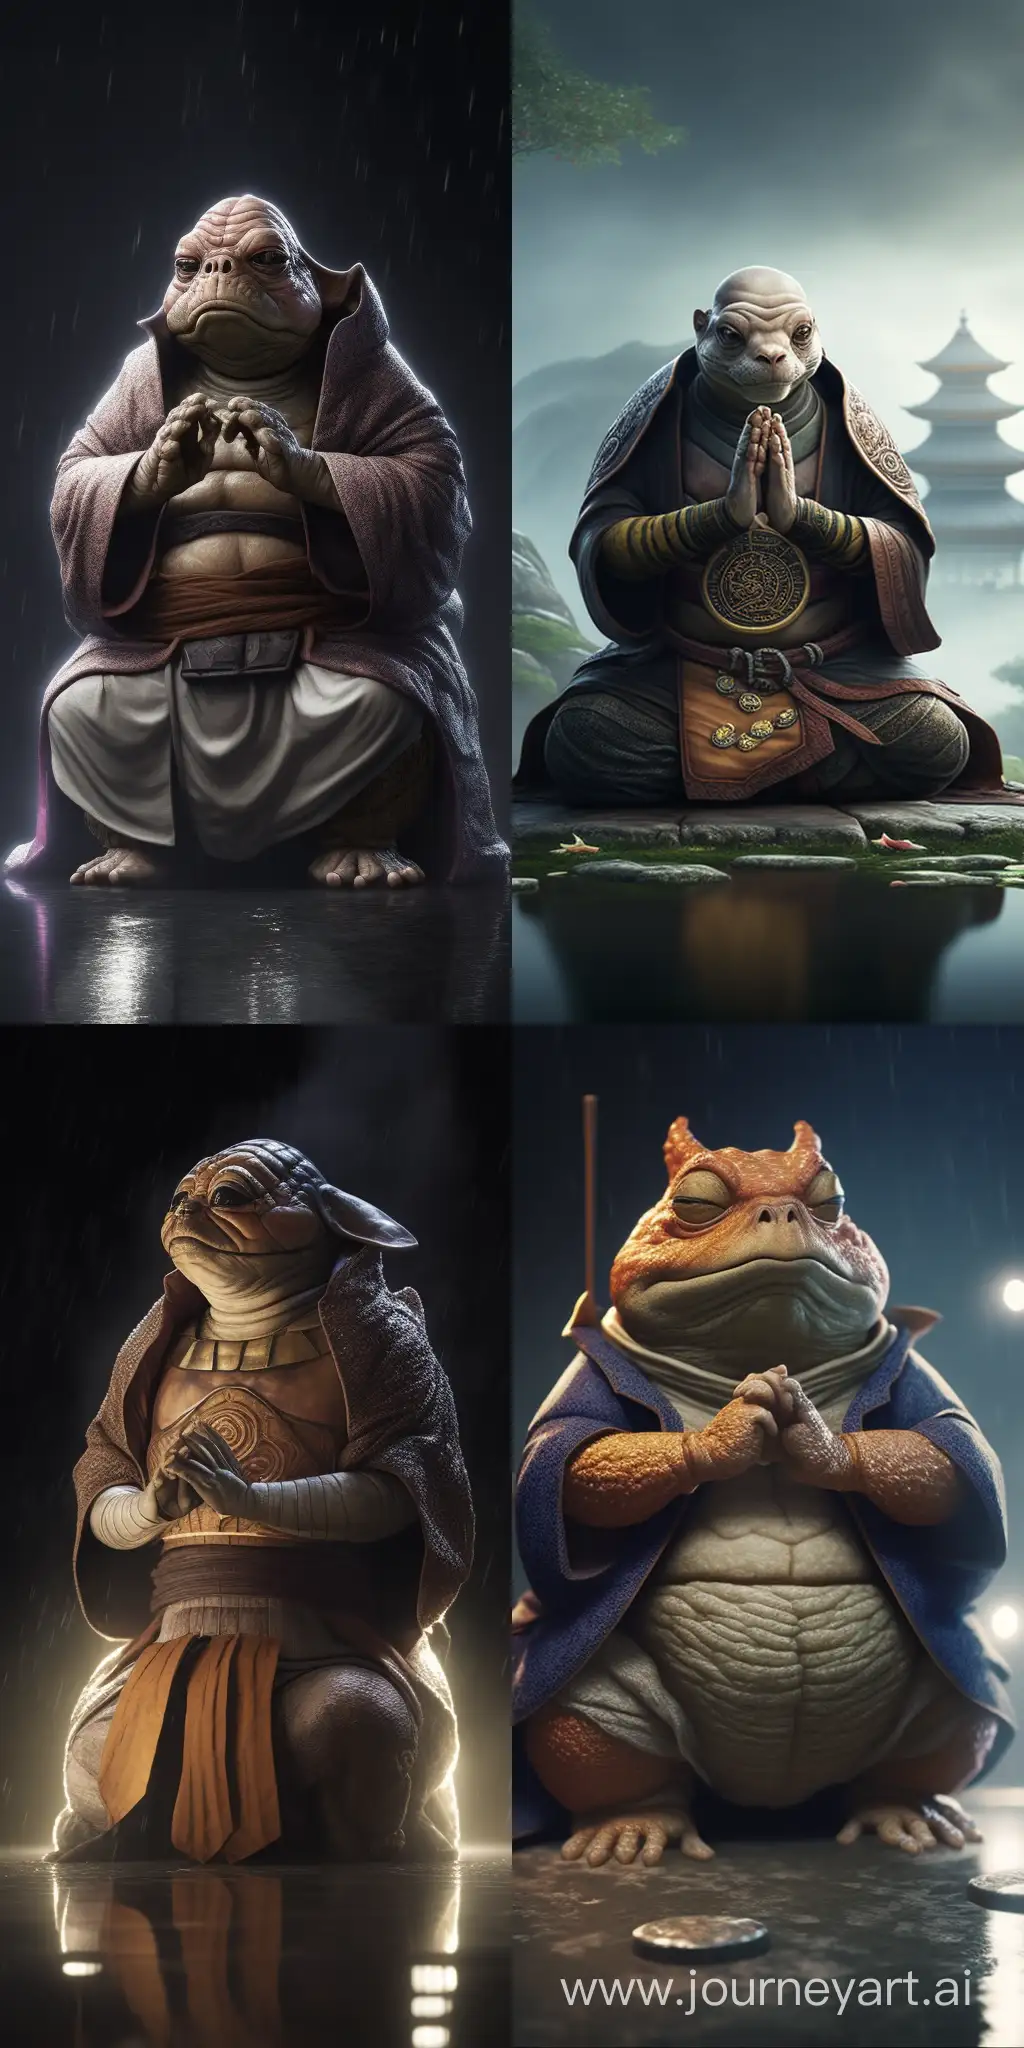 Wise-Kung-Fu-Master-Oogway-Meditating-in-Glittering-Robes